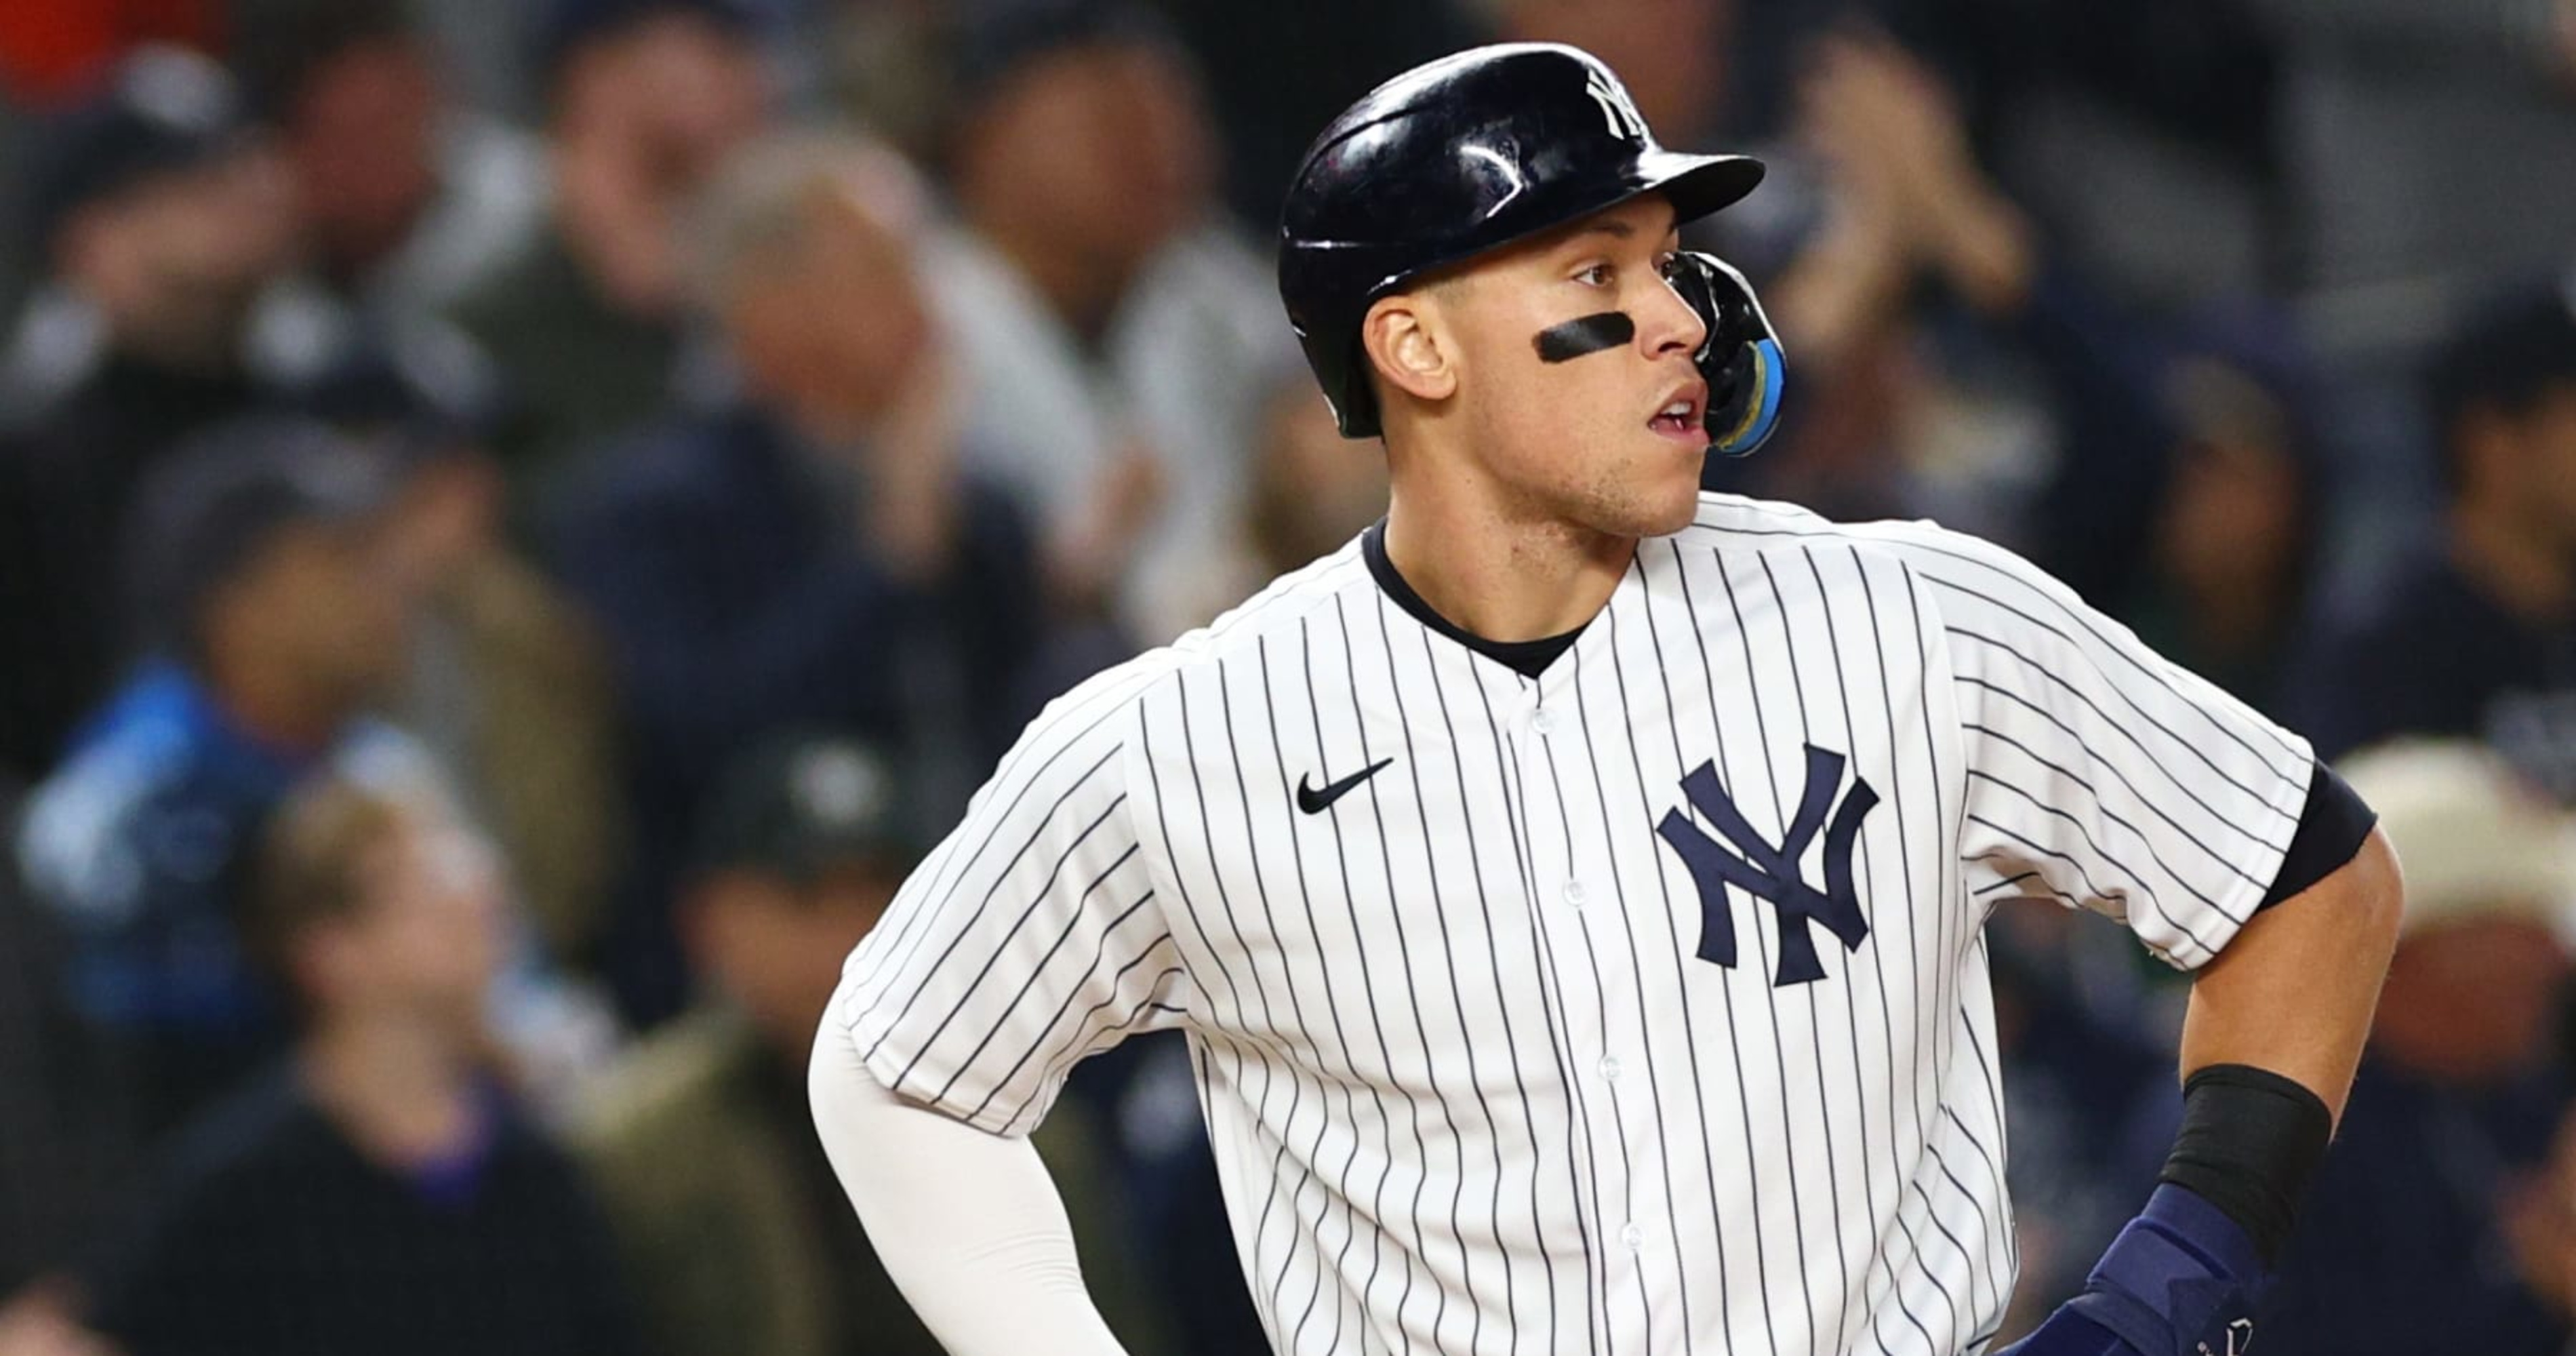 Aaron Judge's clutch hit sets up Yankees-Red Sox wild card game, MLB